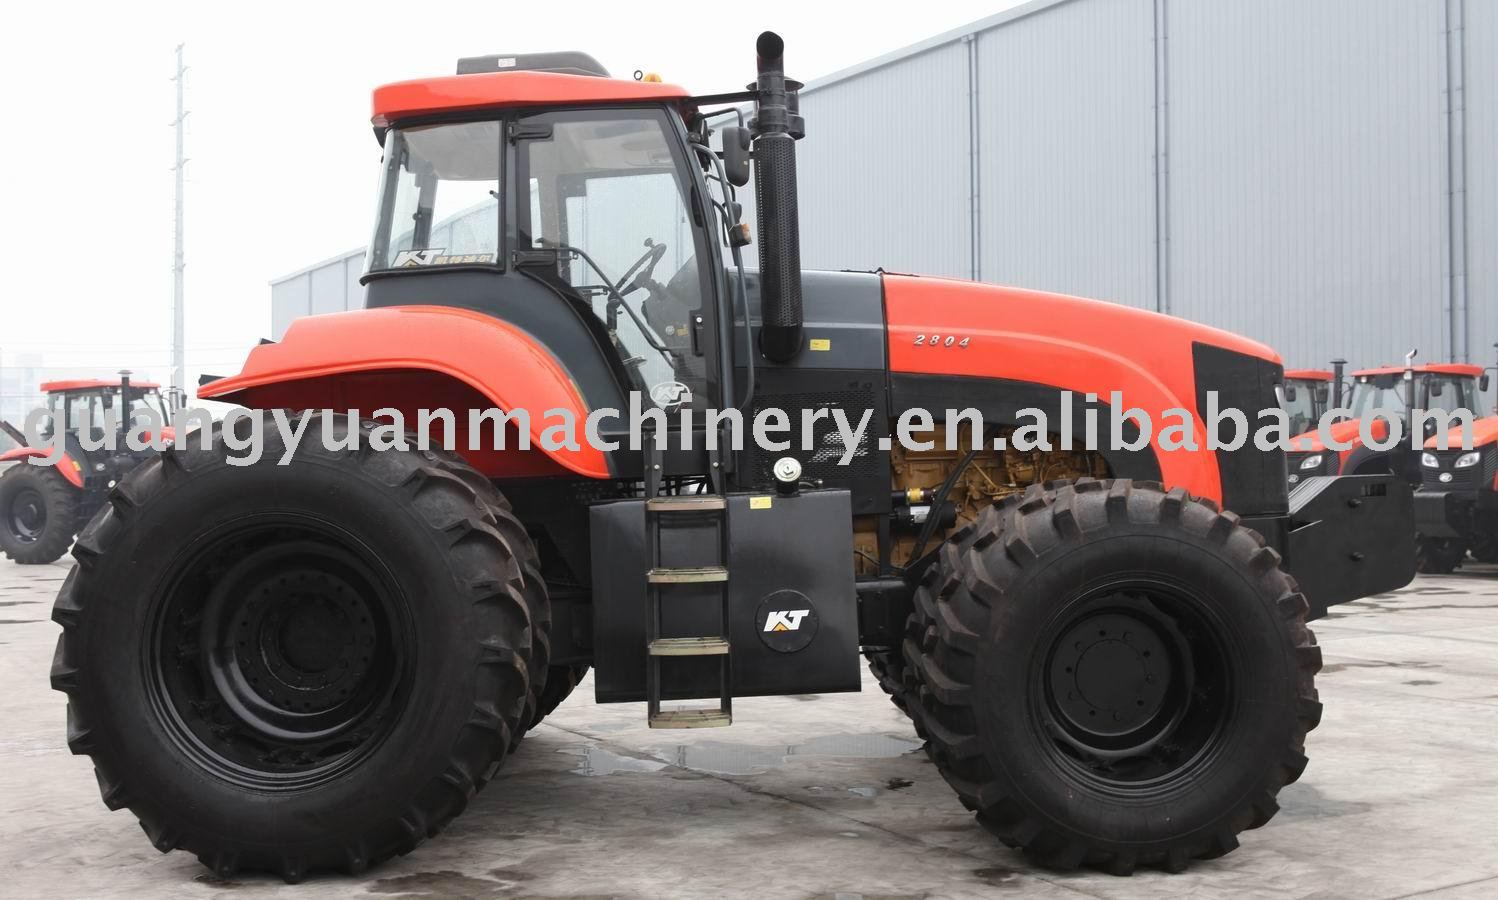 Big_tractor_280HP_4WD_with_cabin.jpg